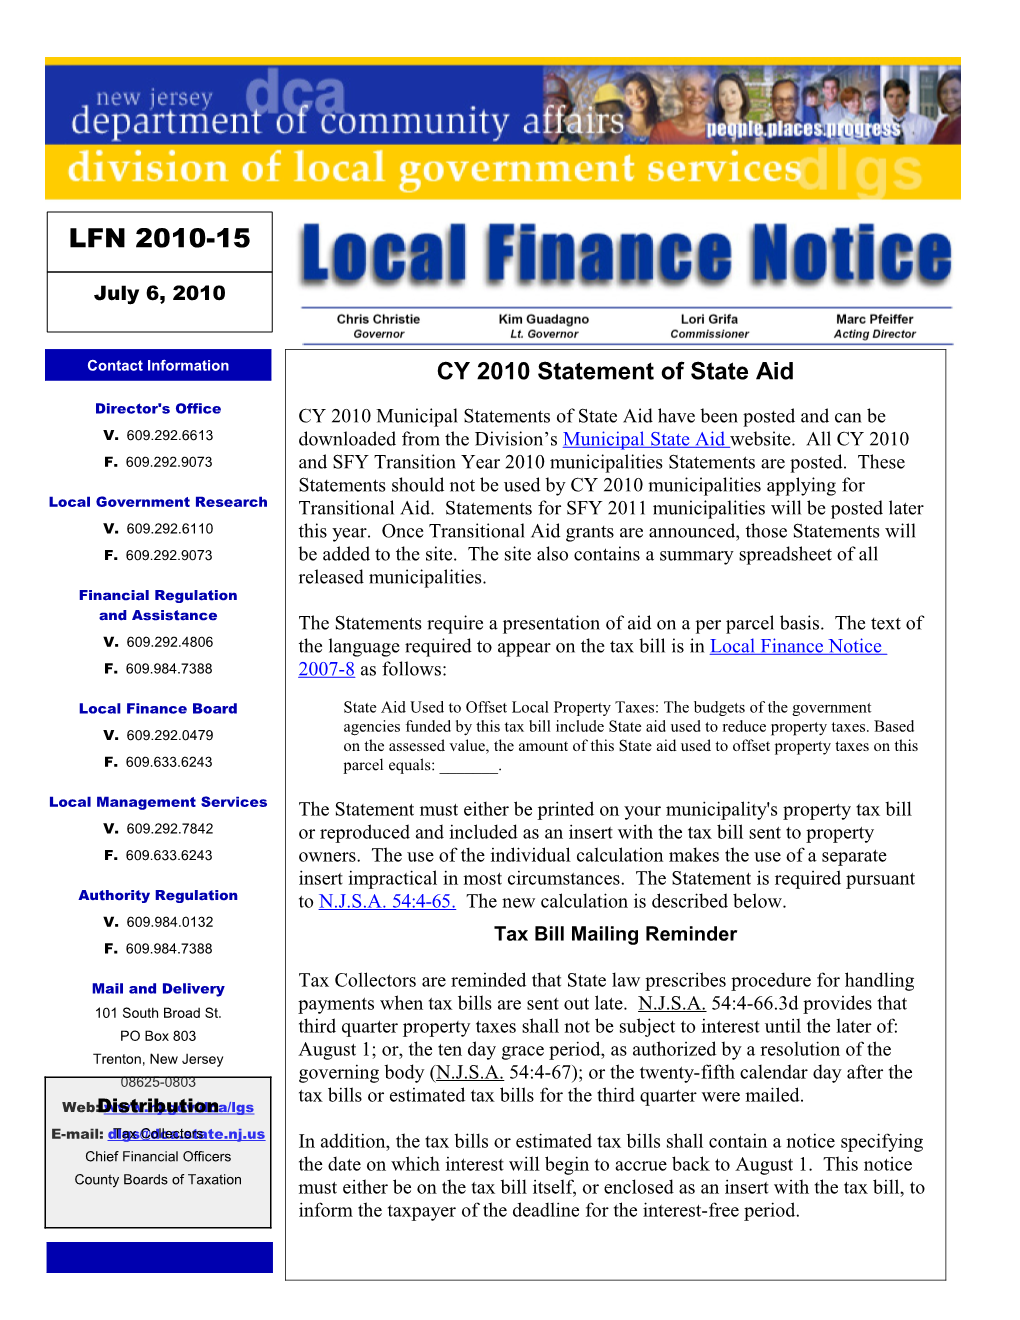 Local Finance Notice 2010-15 July 6, 2010 Page 3